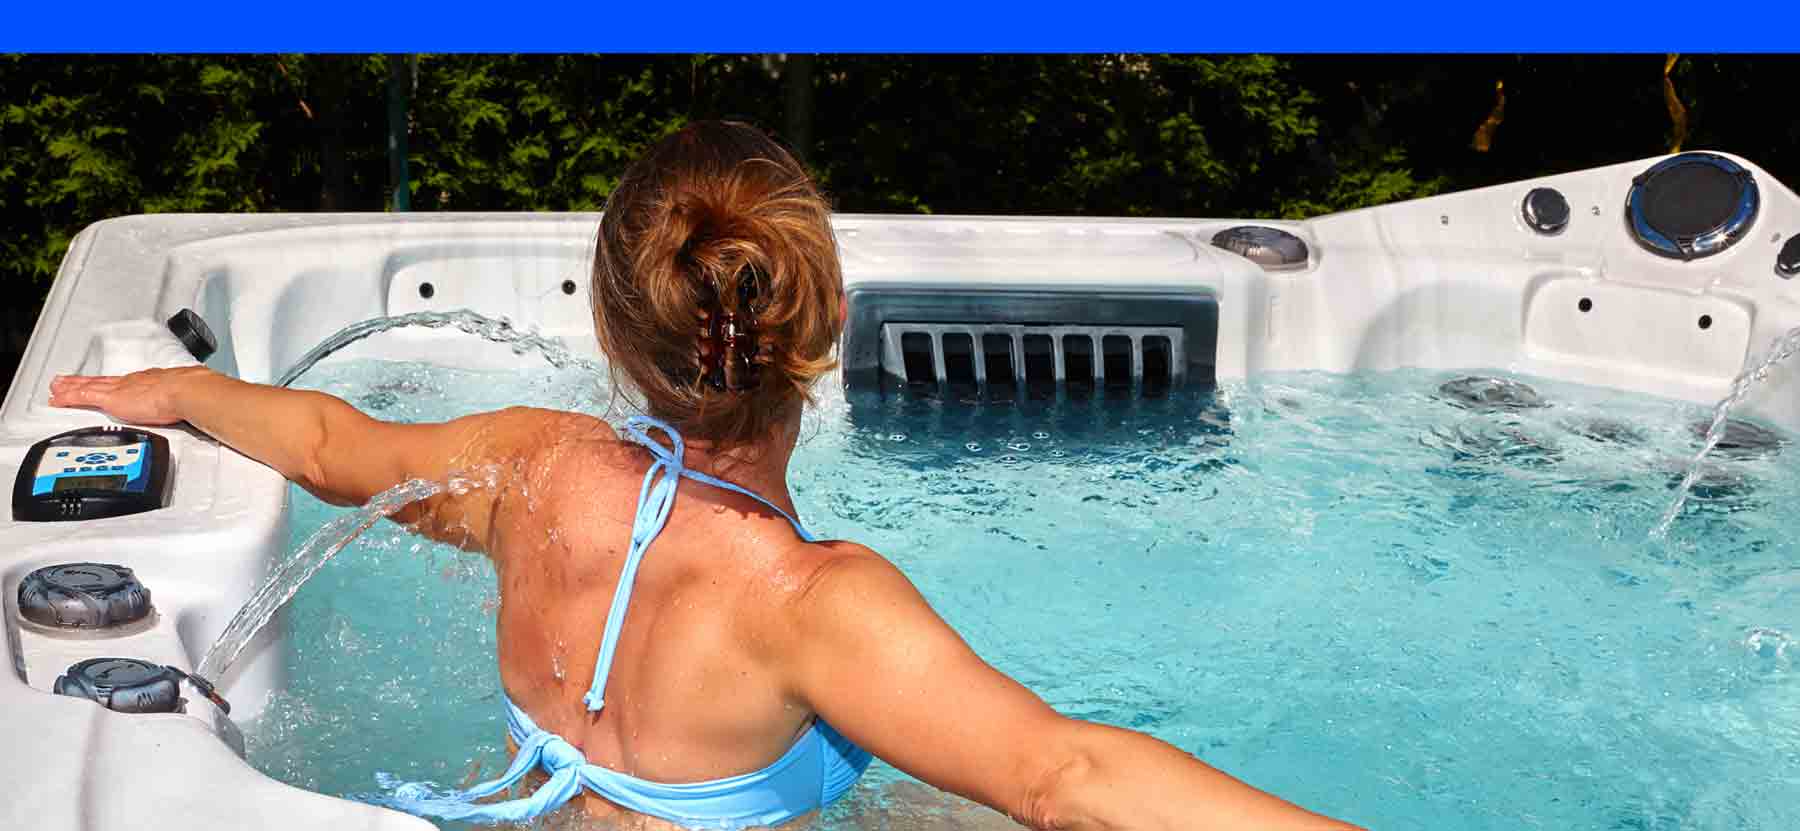 Get your hot tub and spa maintained by Quality Pool & Spa of Moorhead, Minnesota.